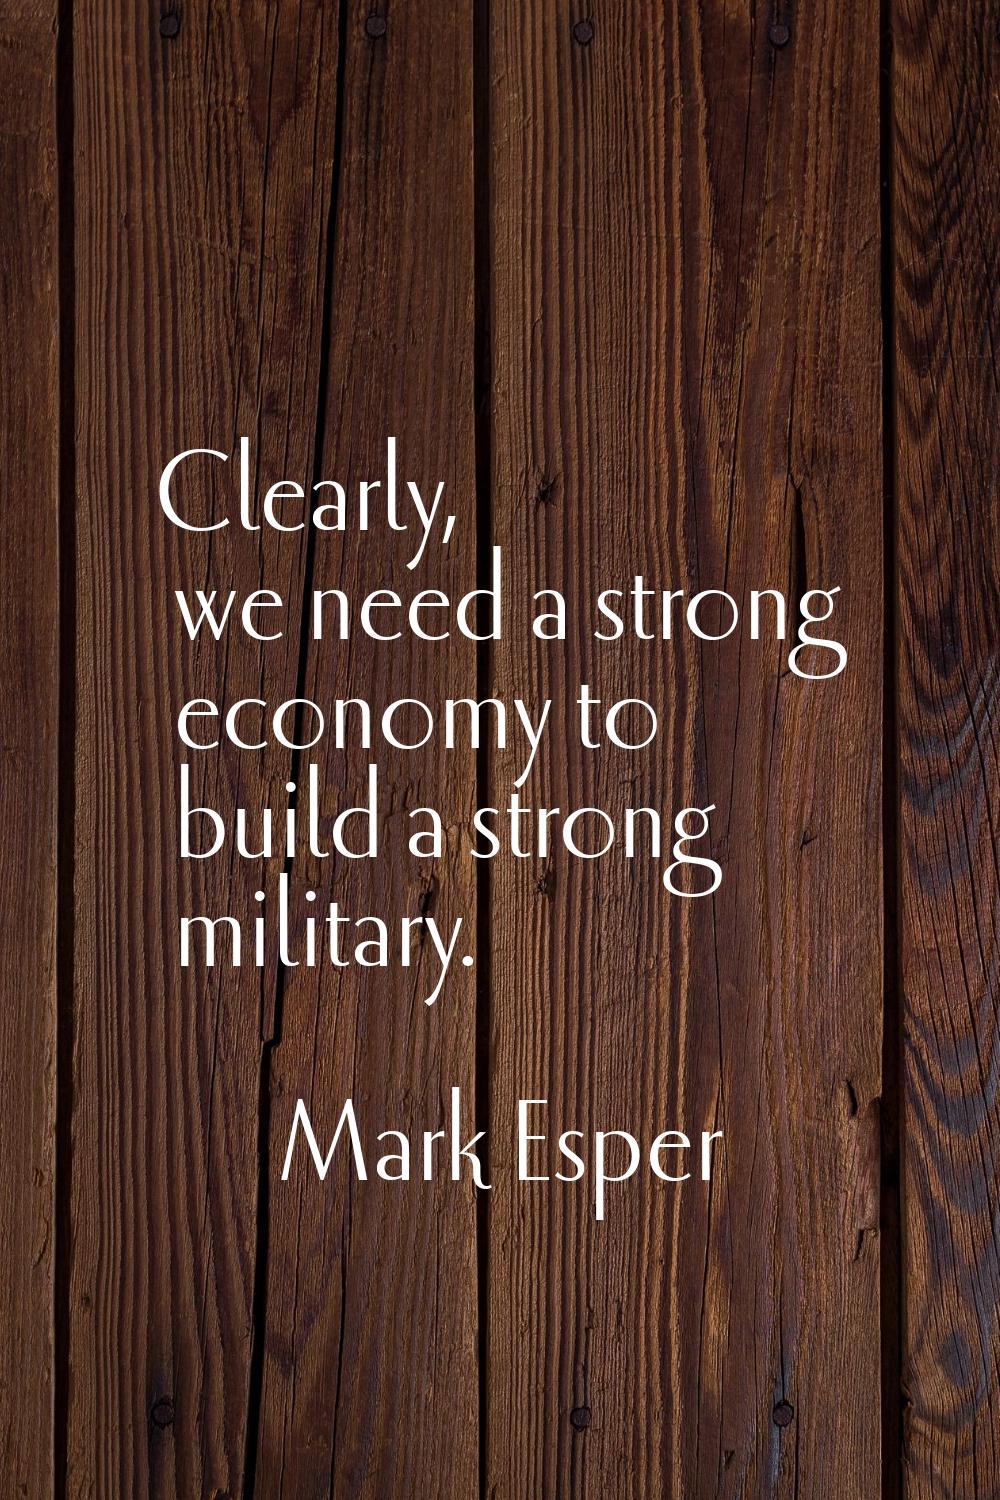 Clearly, we need a strong economy to build a strong military.